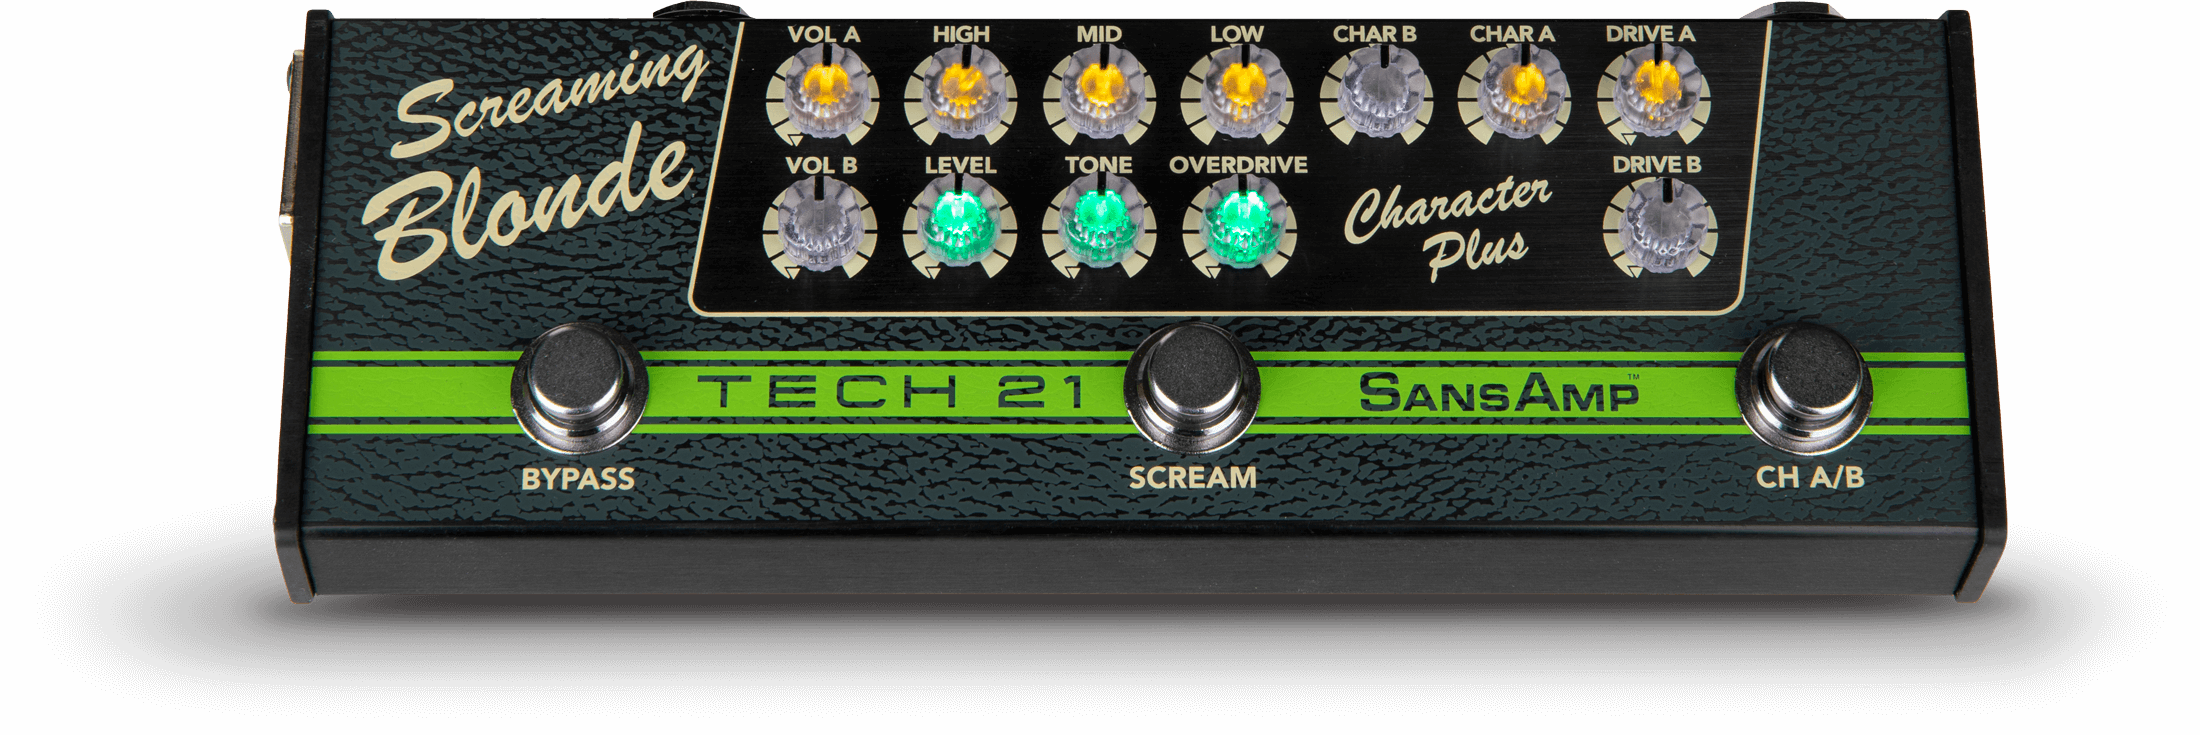 Tech 21 product image of the Screaming Blonde pedal from the SansAmp Character Plus Series